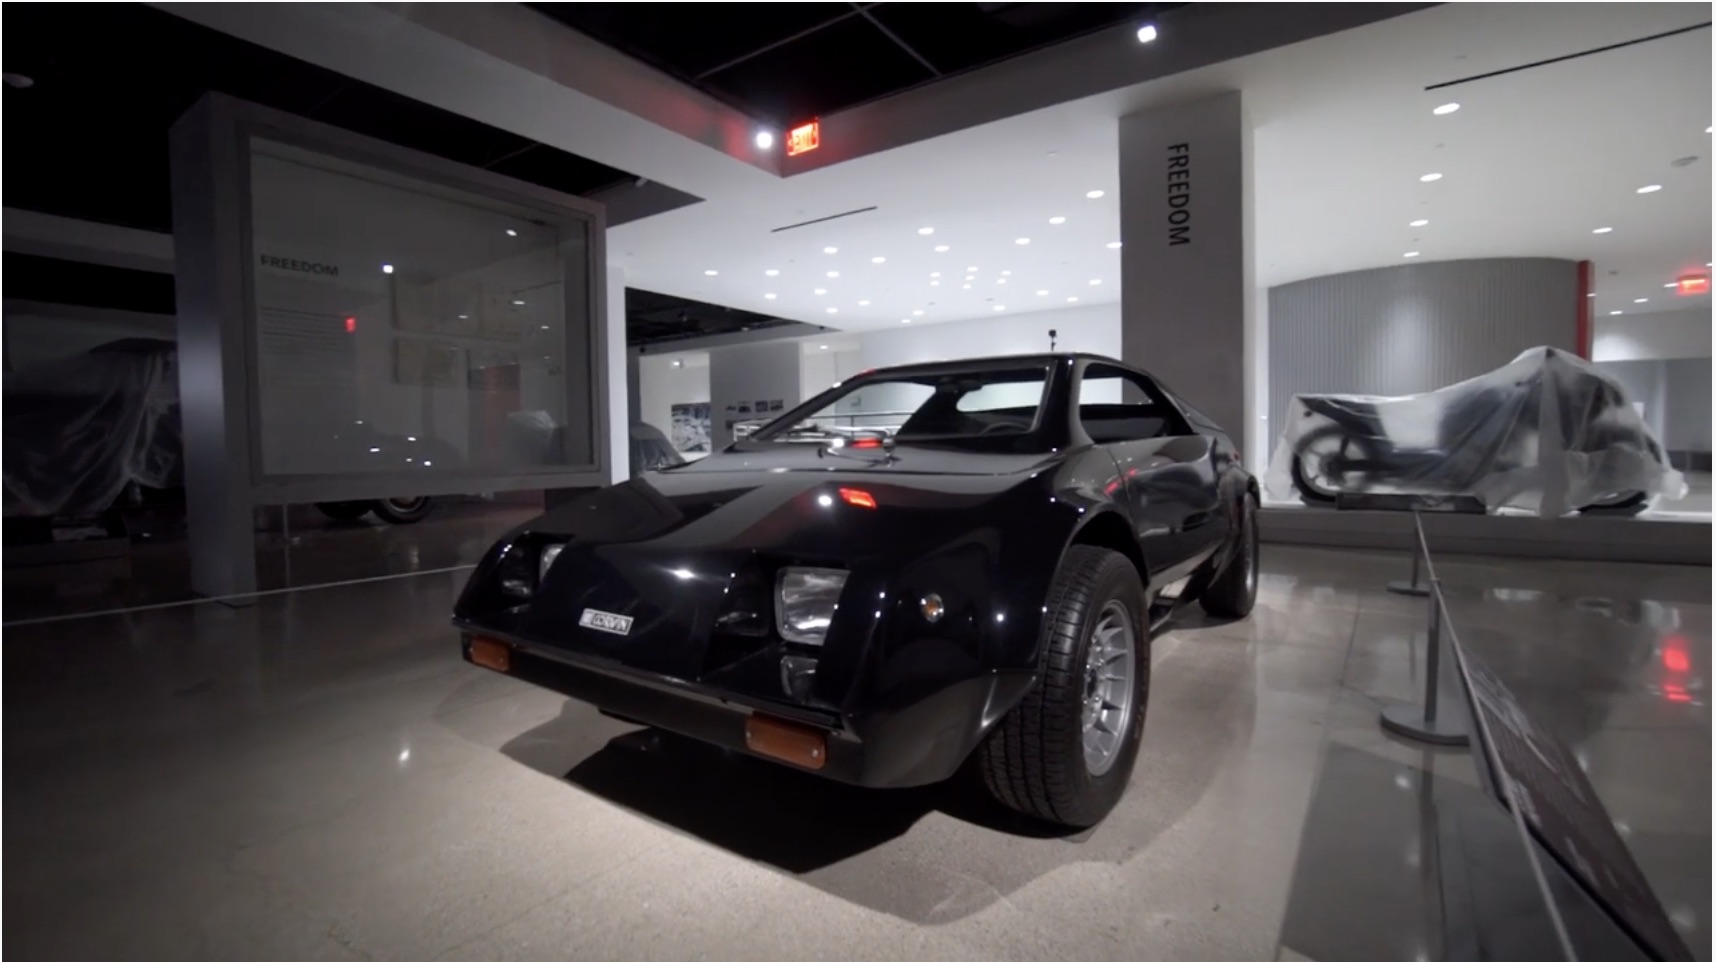 Night At The Museum, Part 1: Leaving A Hoonigan Inside Of The Petersen Museum!